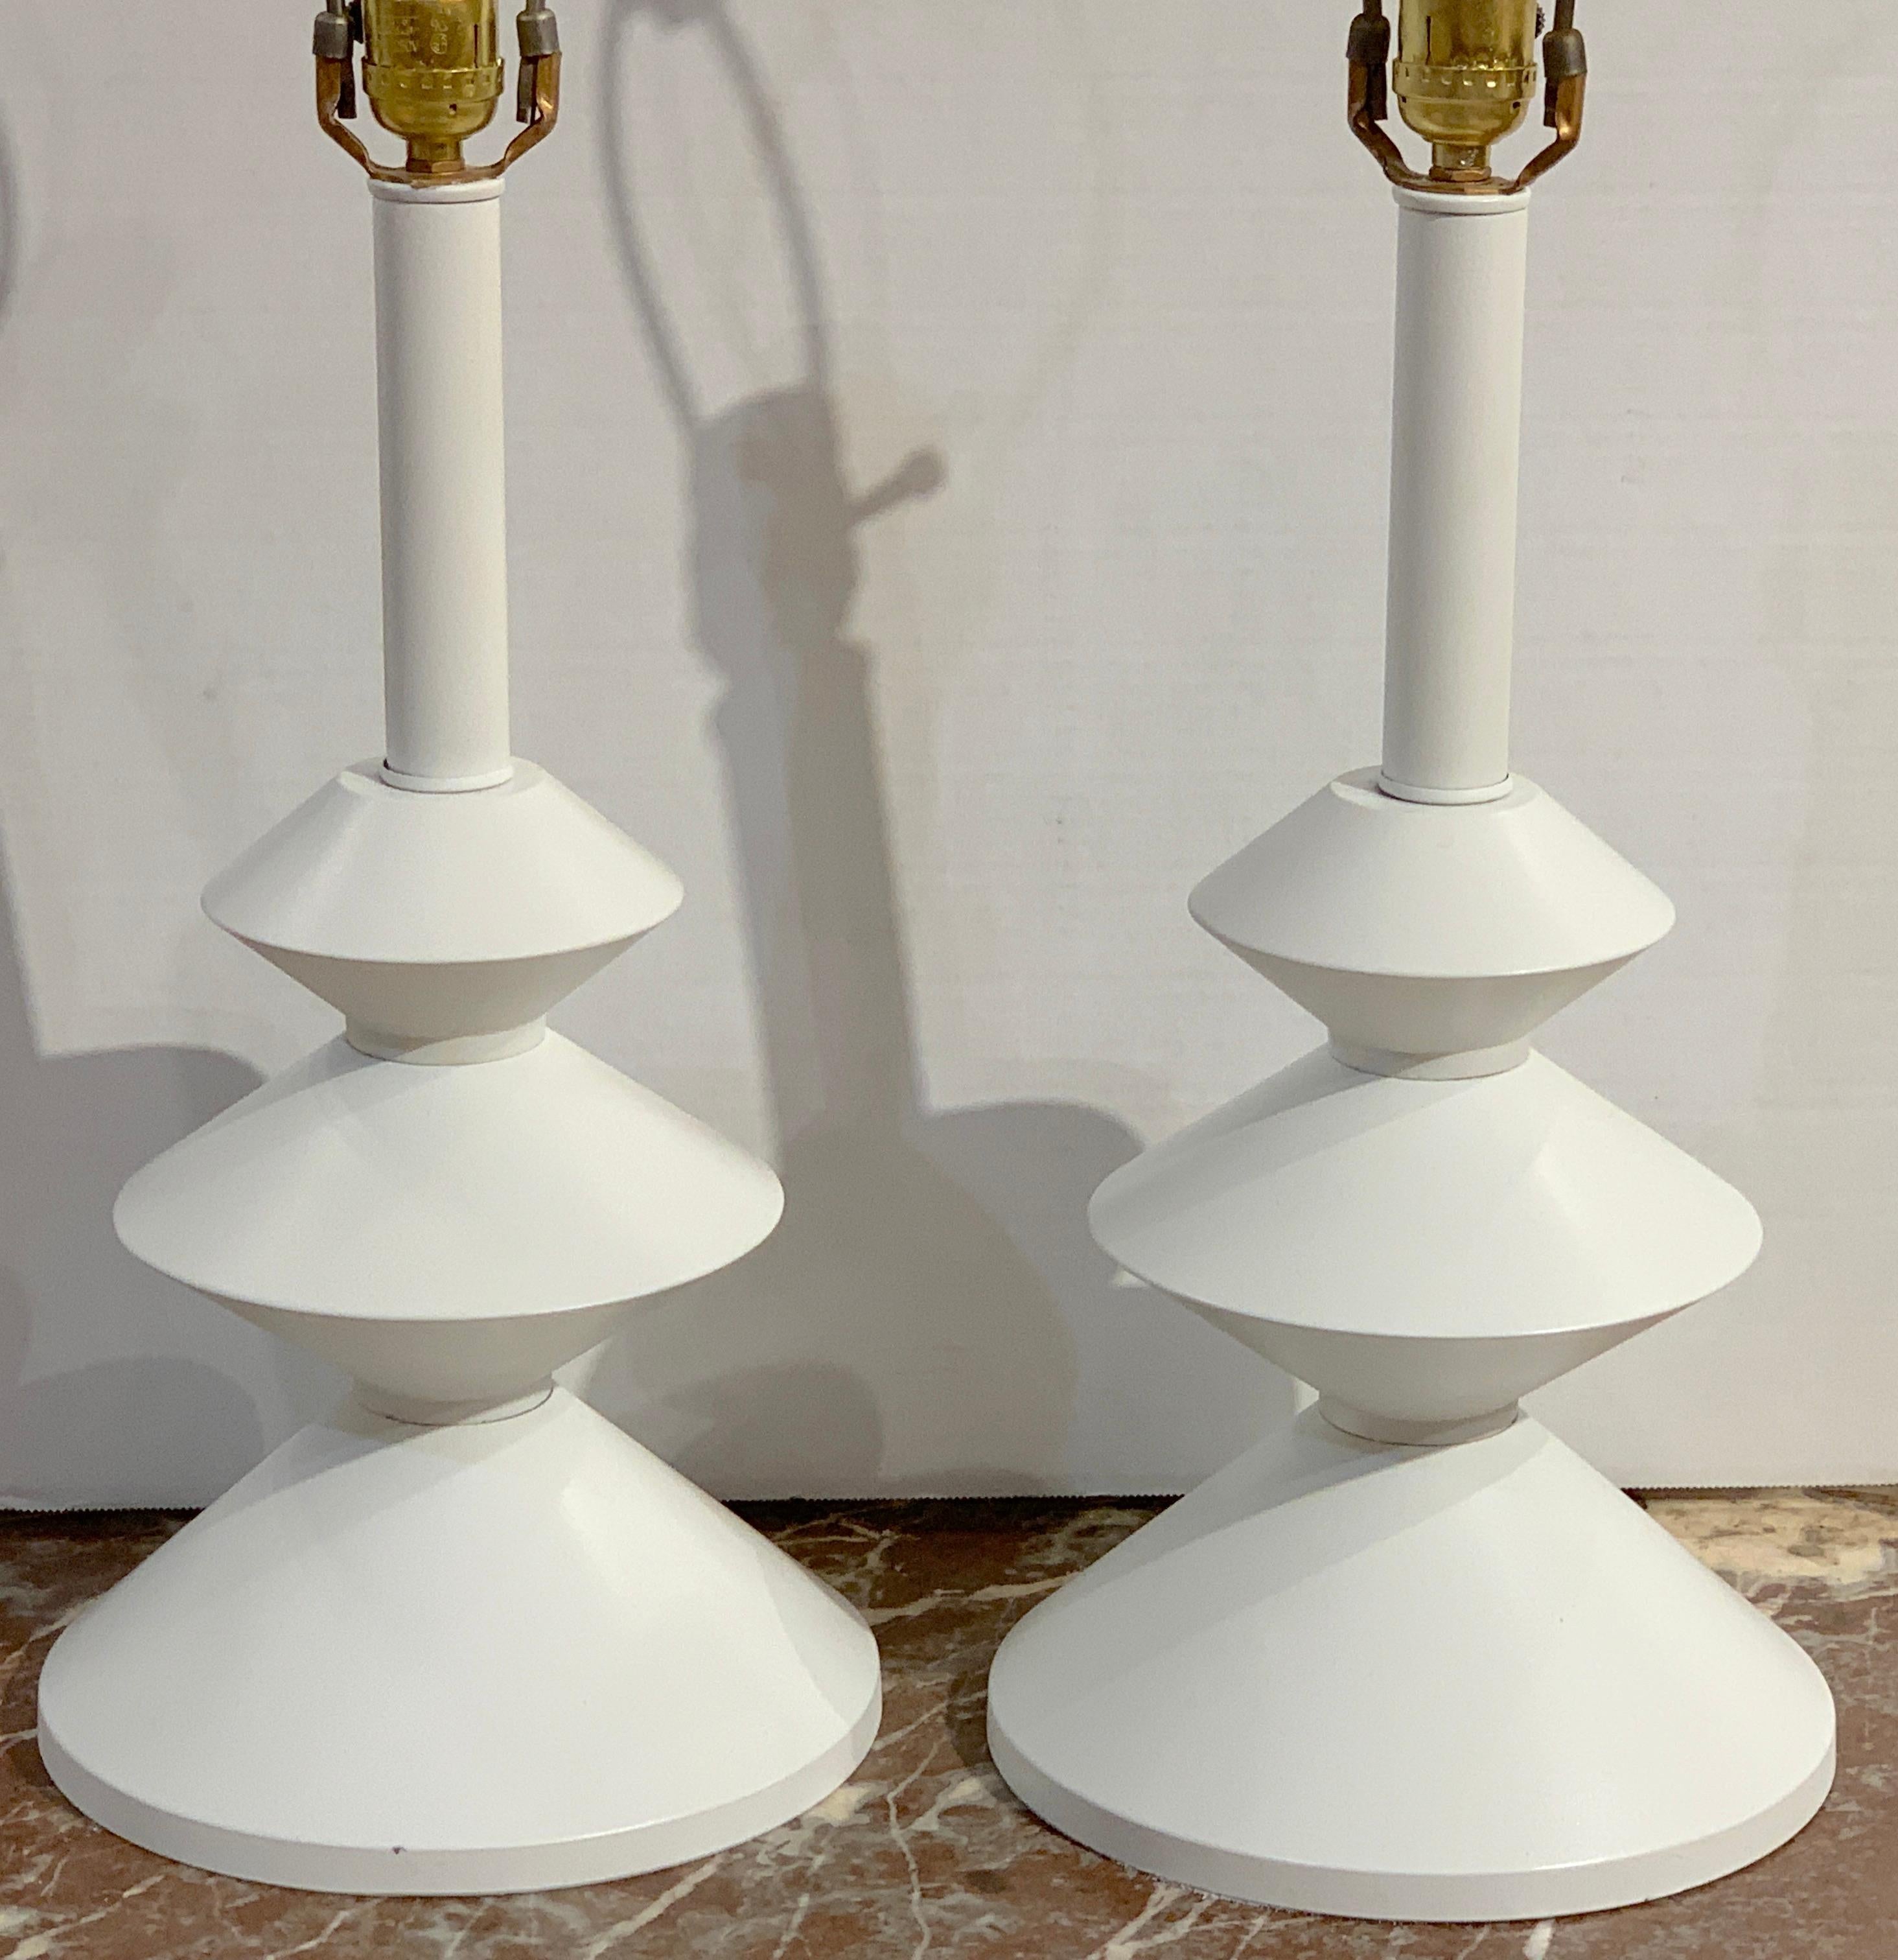 Pair of After, Alberto Giacometti Style Enameled Metal Sculptural Lamps In Good Condition For Sale In Atlanta, GA